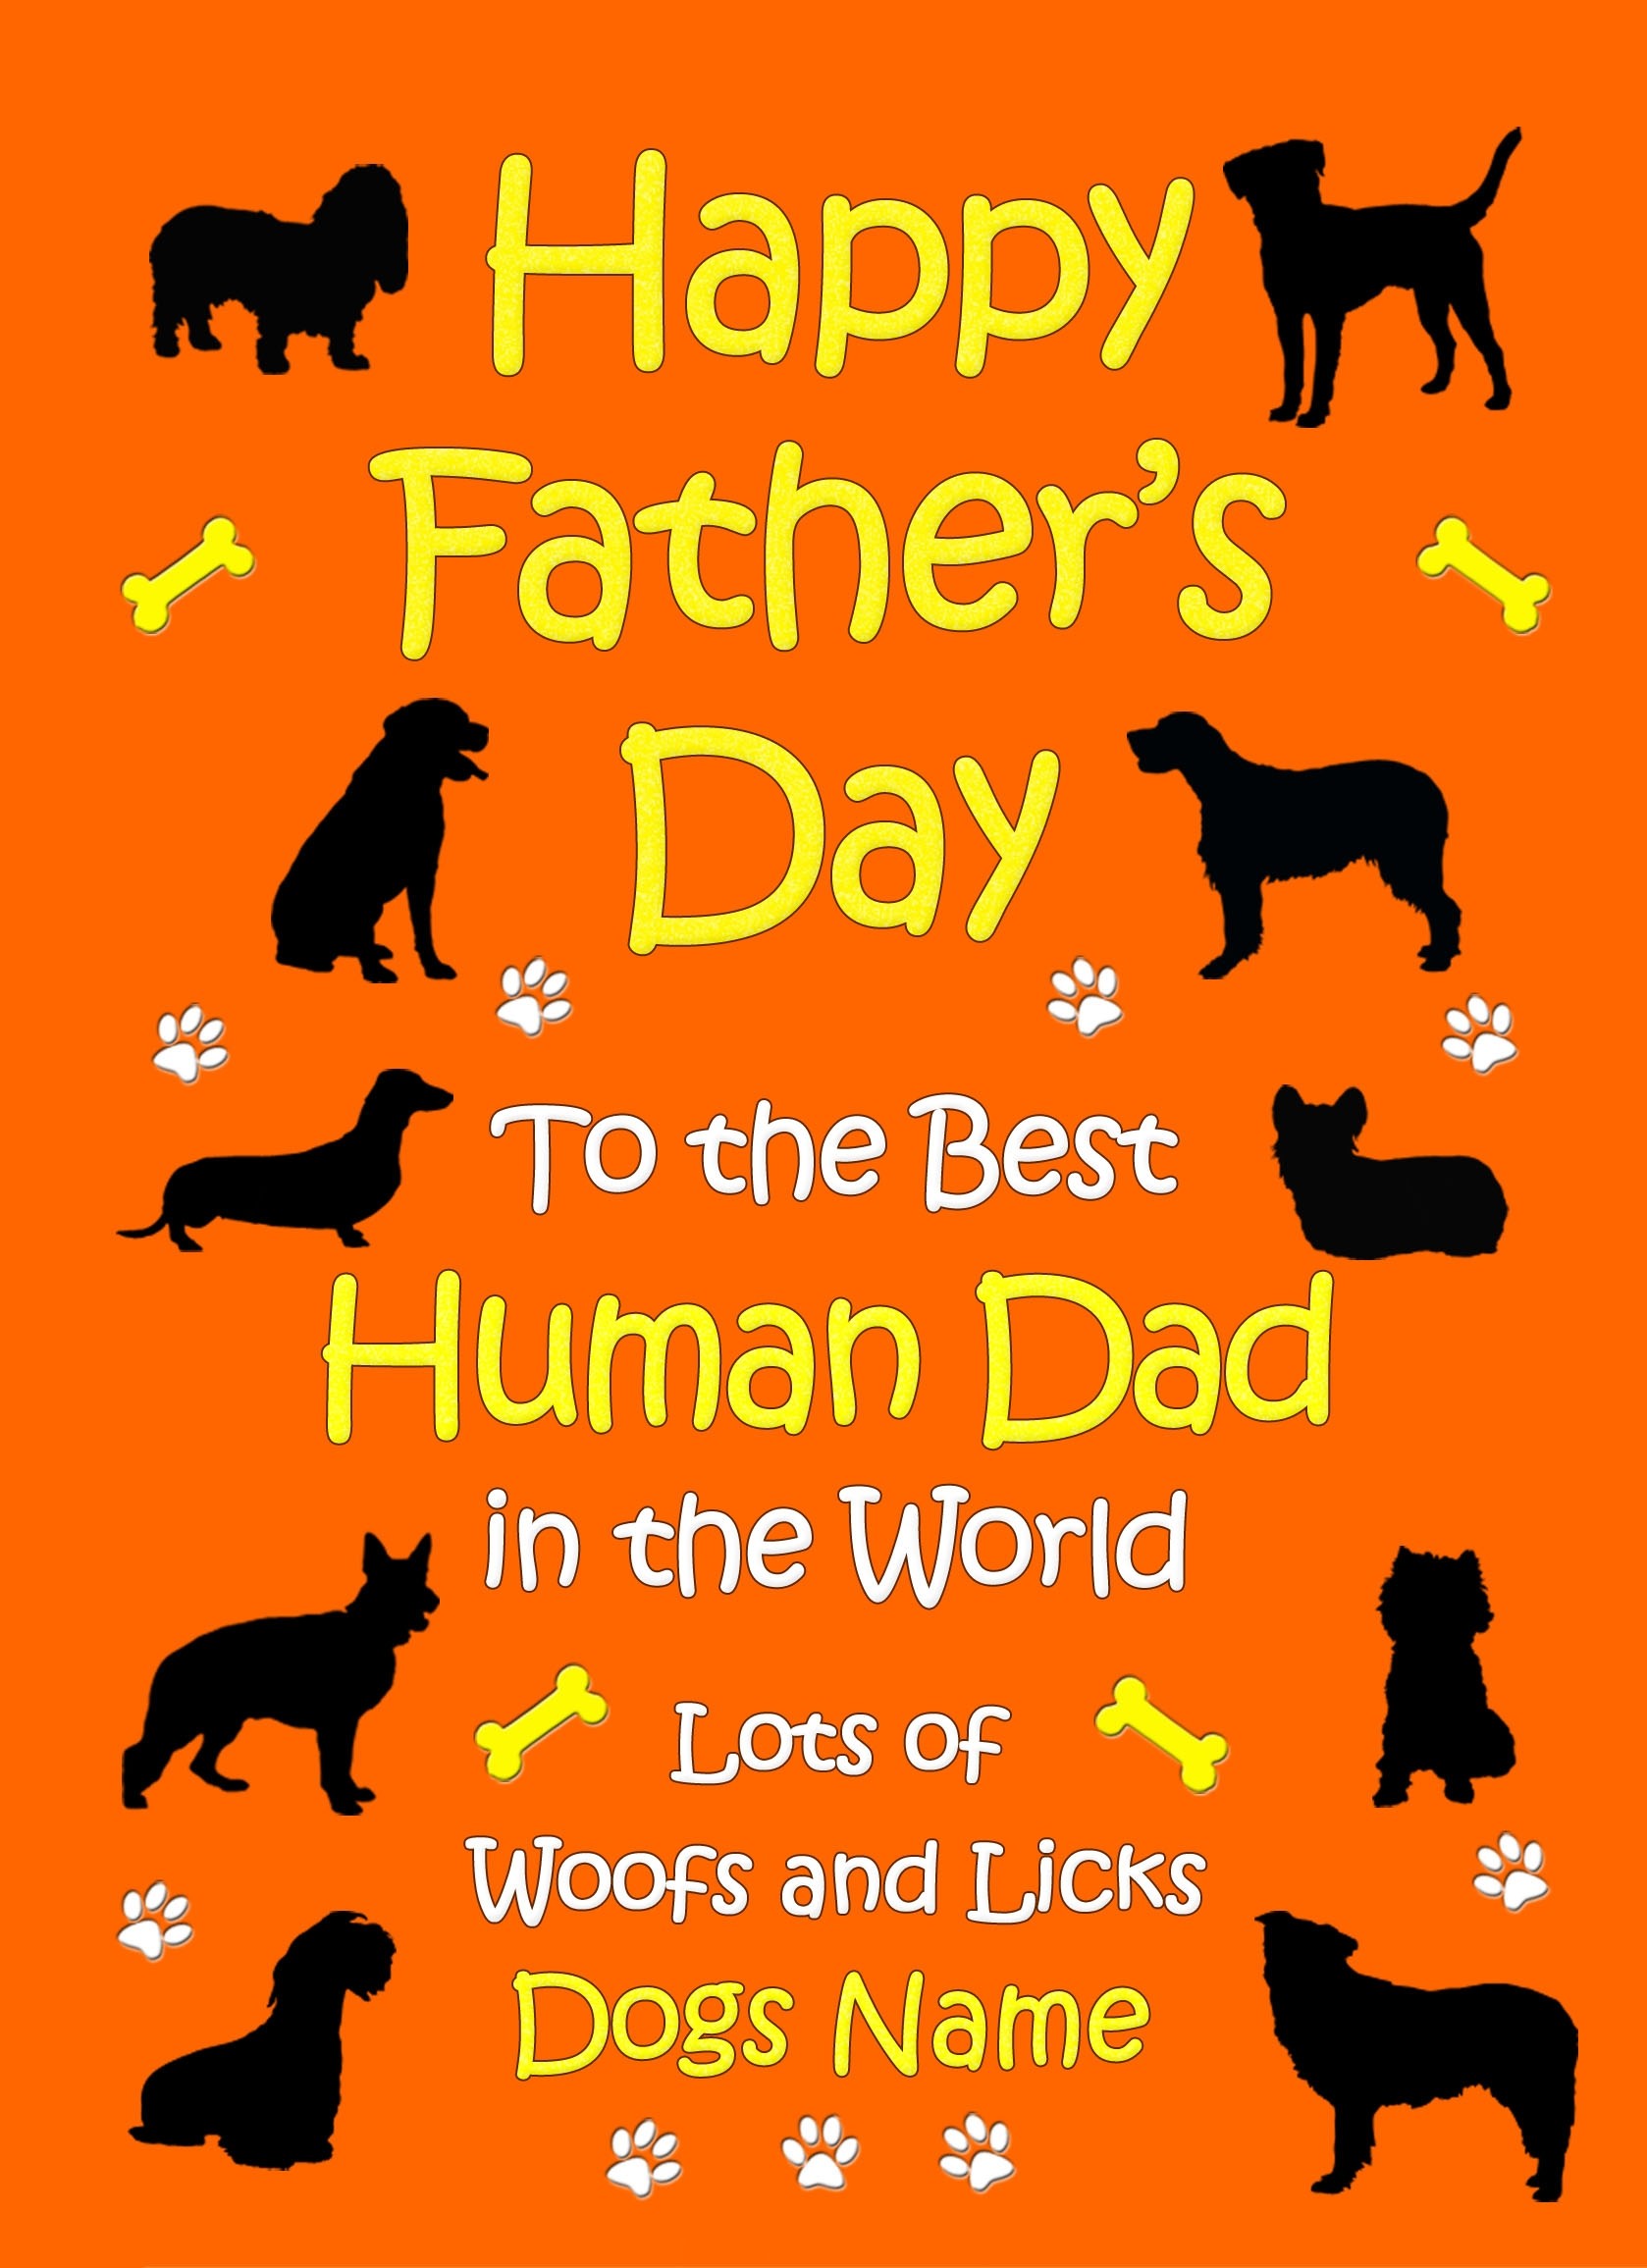 Personalised From The Dog Fathers Day Card (Orange, Human Dad)